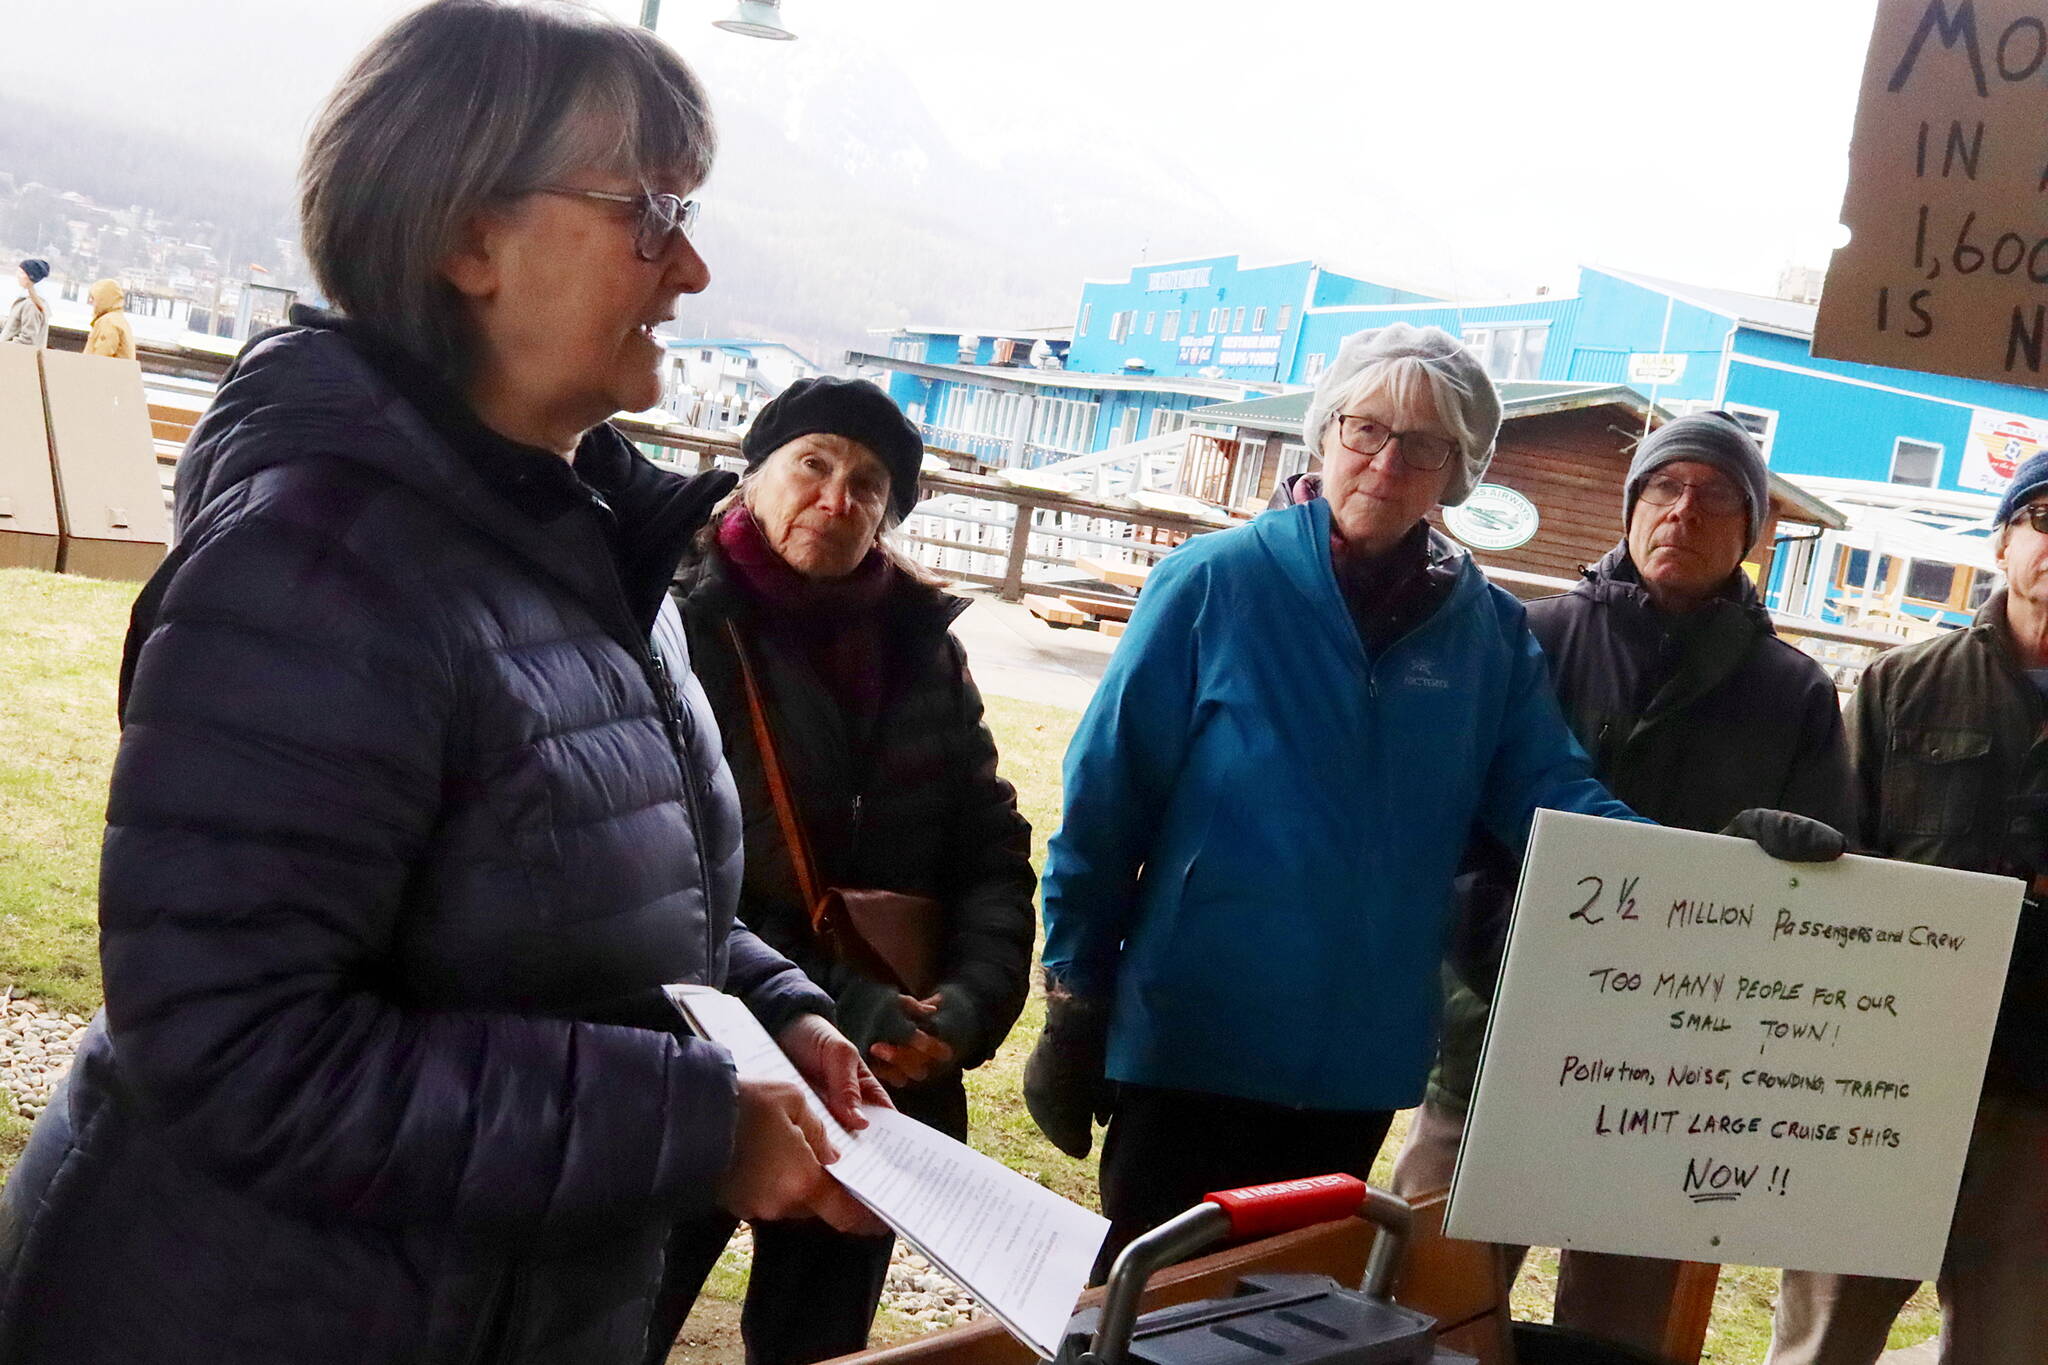 Karla Hart leads a rally in Marine Park on April 9 calling for a ban on large cruise ships on Saturdays in Juneau. Supporters turned in signatures on Thursday for a petition seeking to put the question to local voters. (Mark Sabbatini / Juneau Empire file photo)